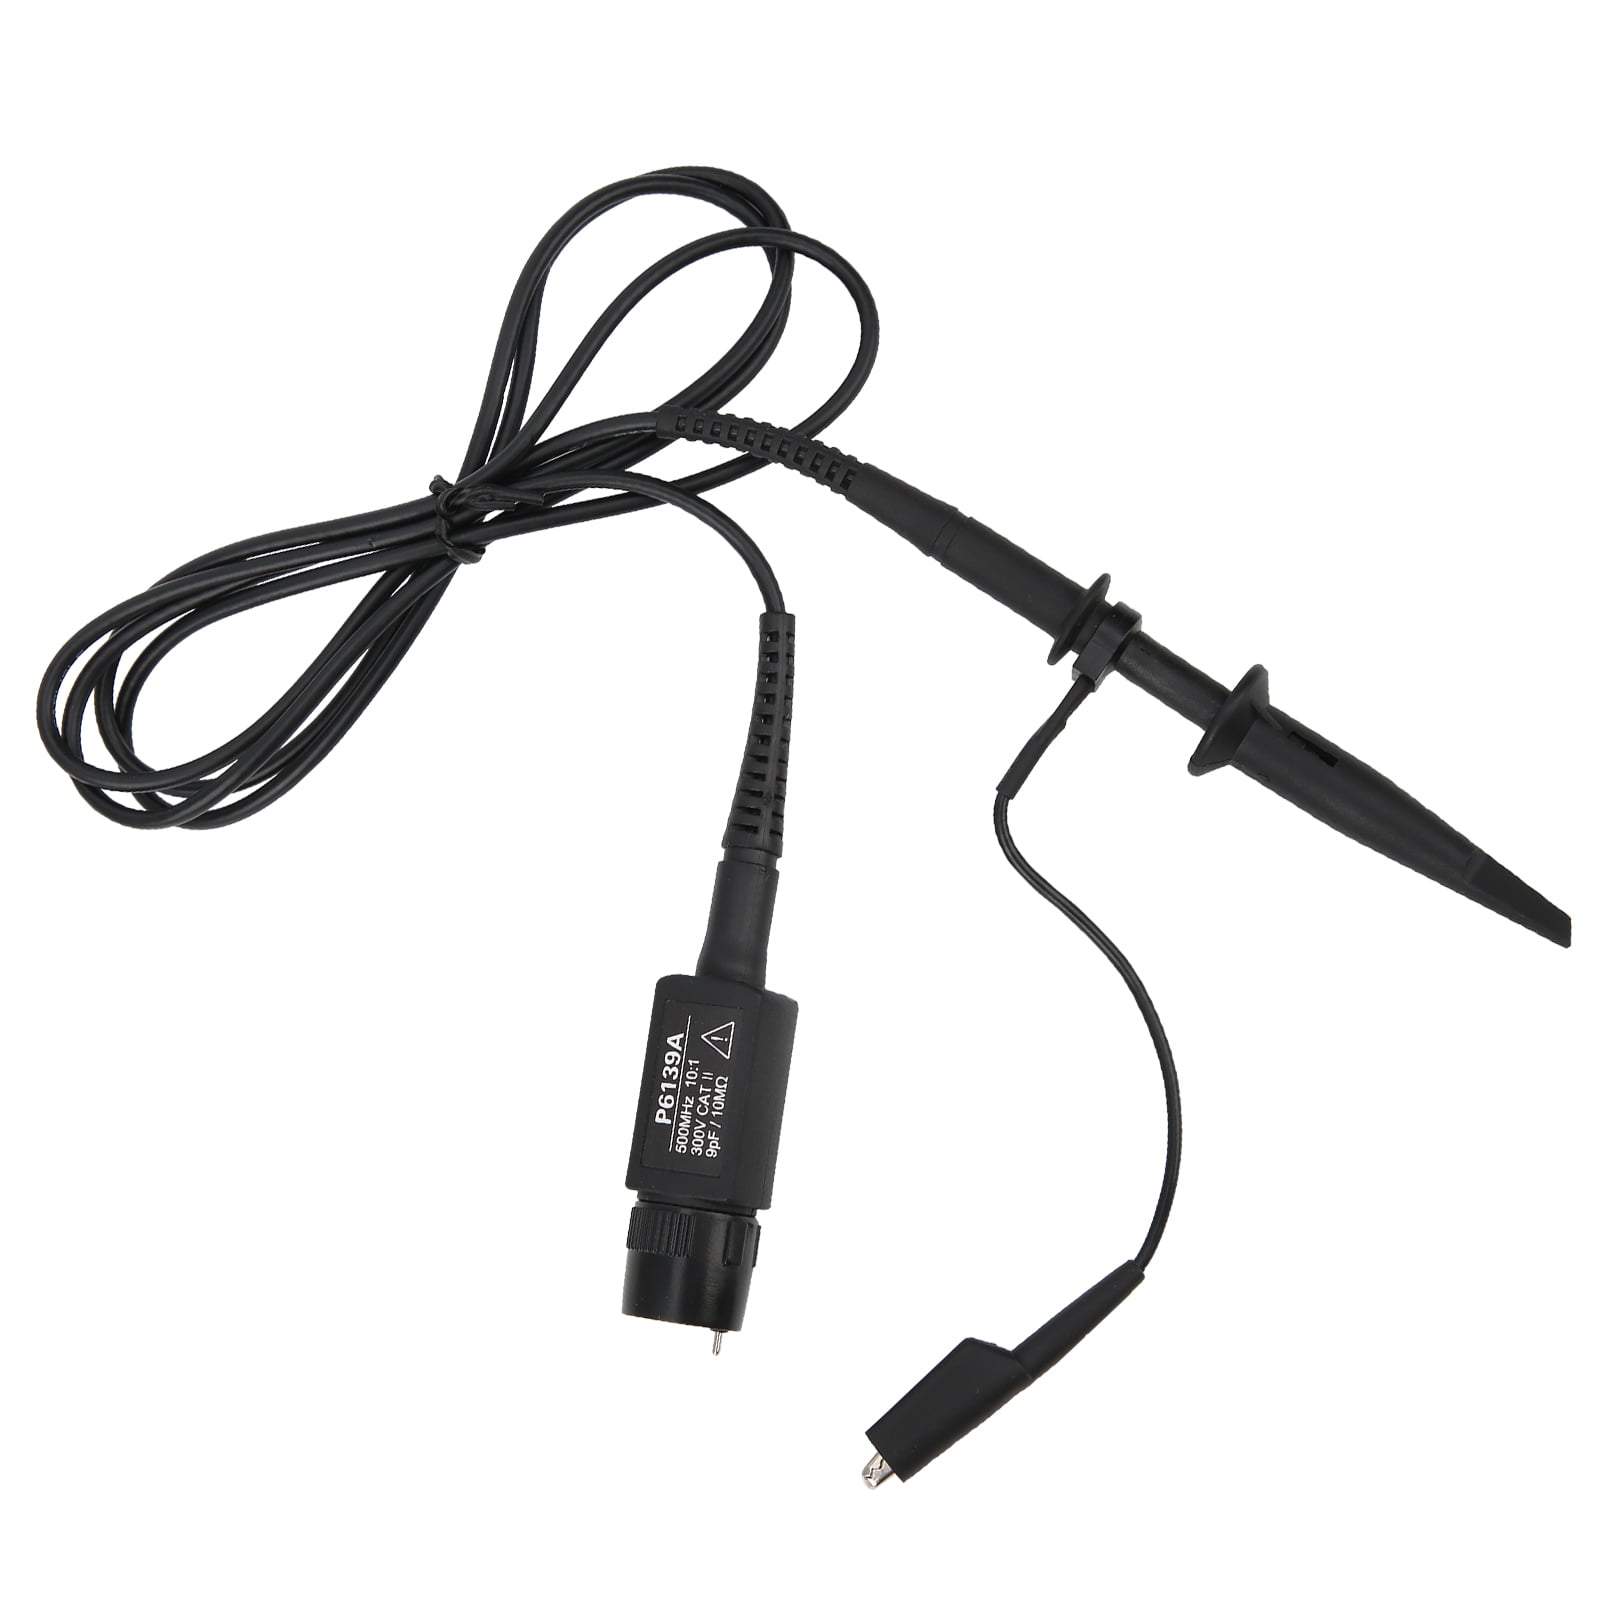 Advanced Marker Rings Oscilloscope Parts Probe Tester Troubleshooting Daily Life for Any Data Transmission Installation Job Cable Tester a Variety of uses 